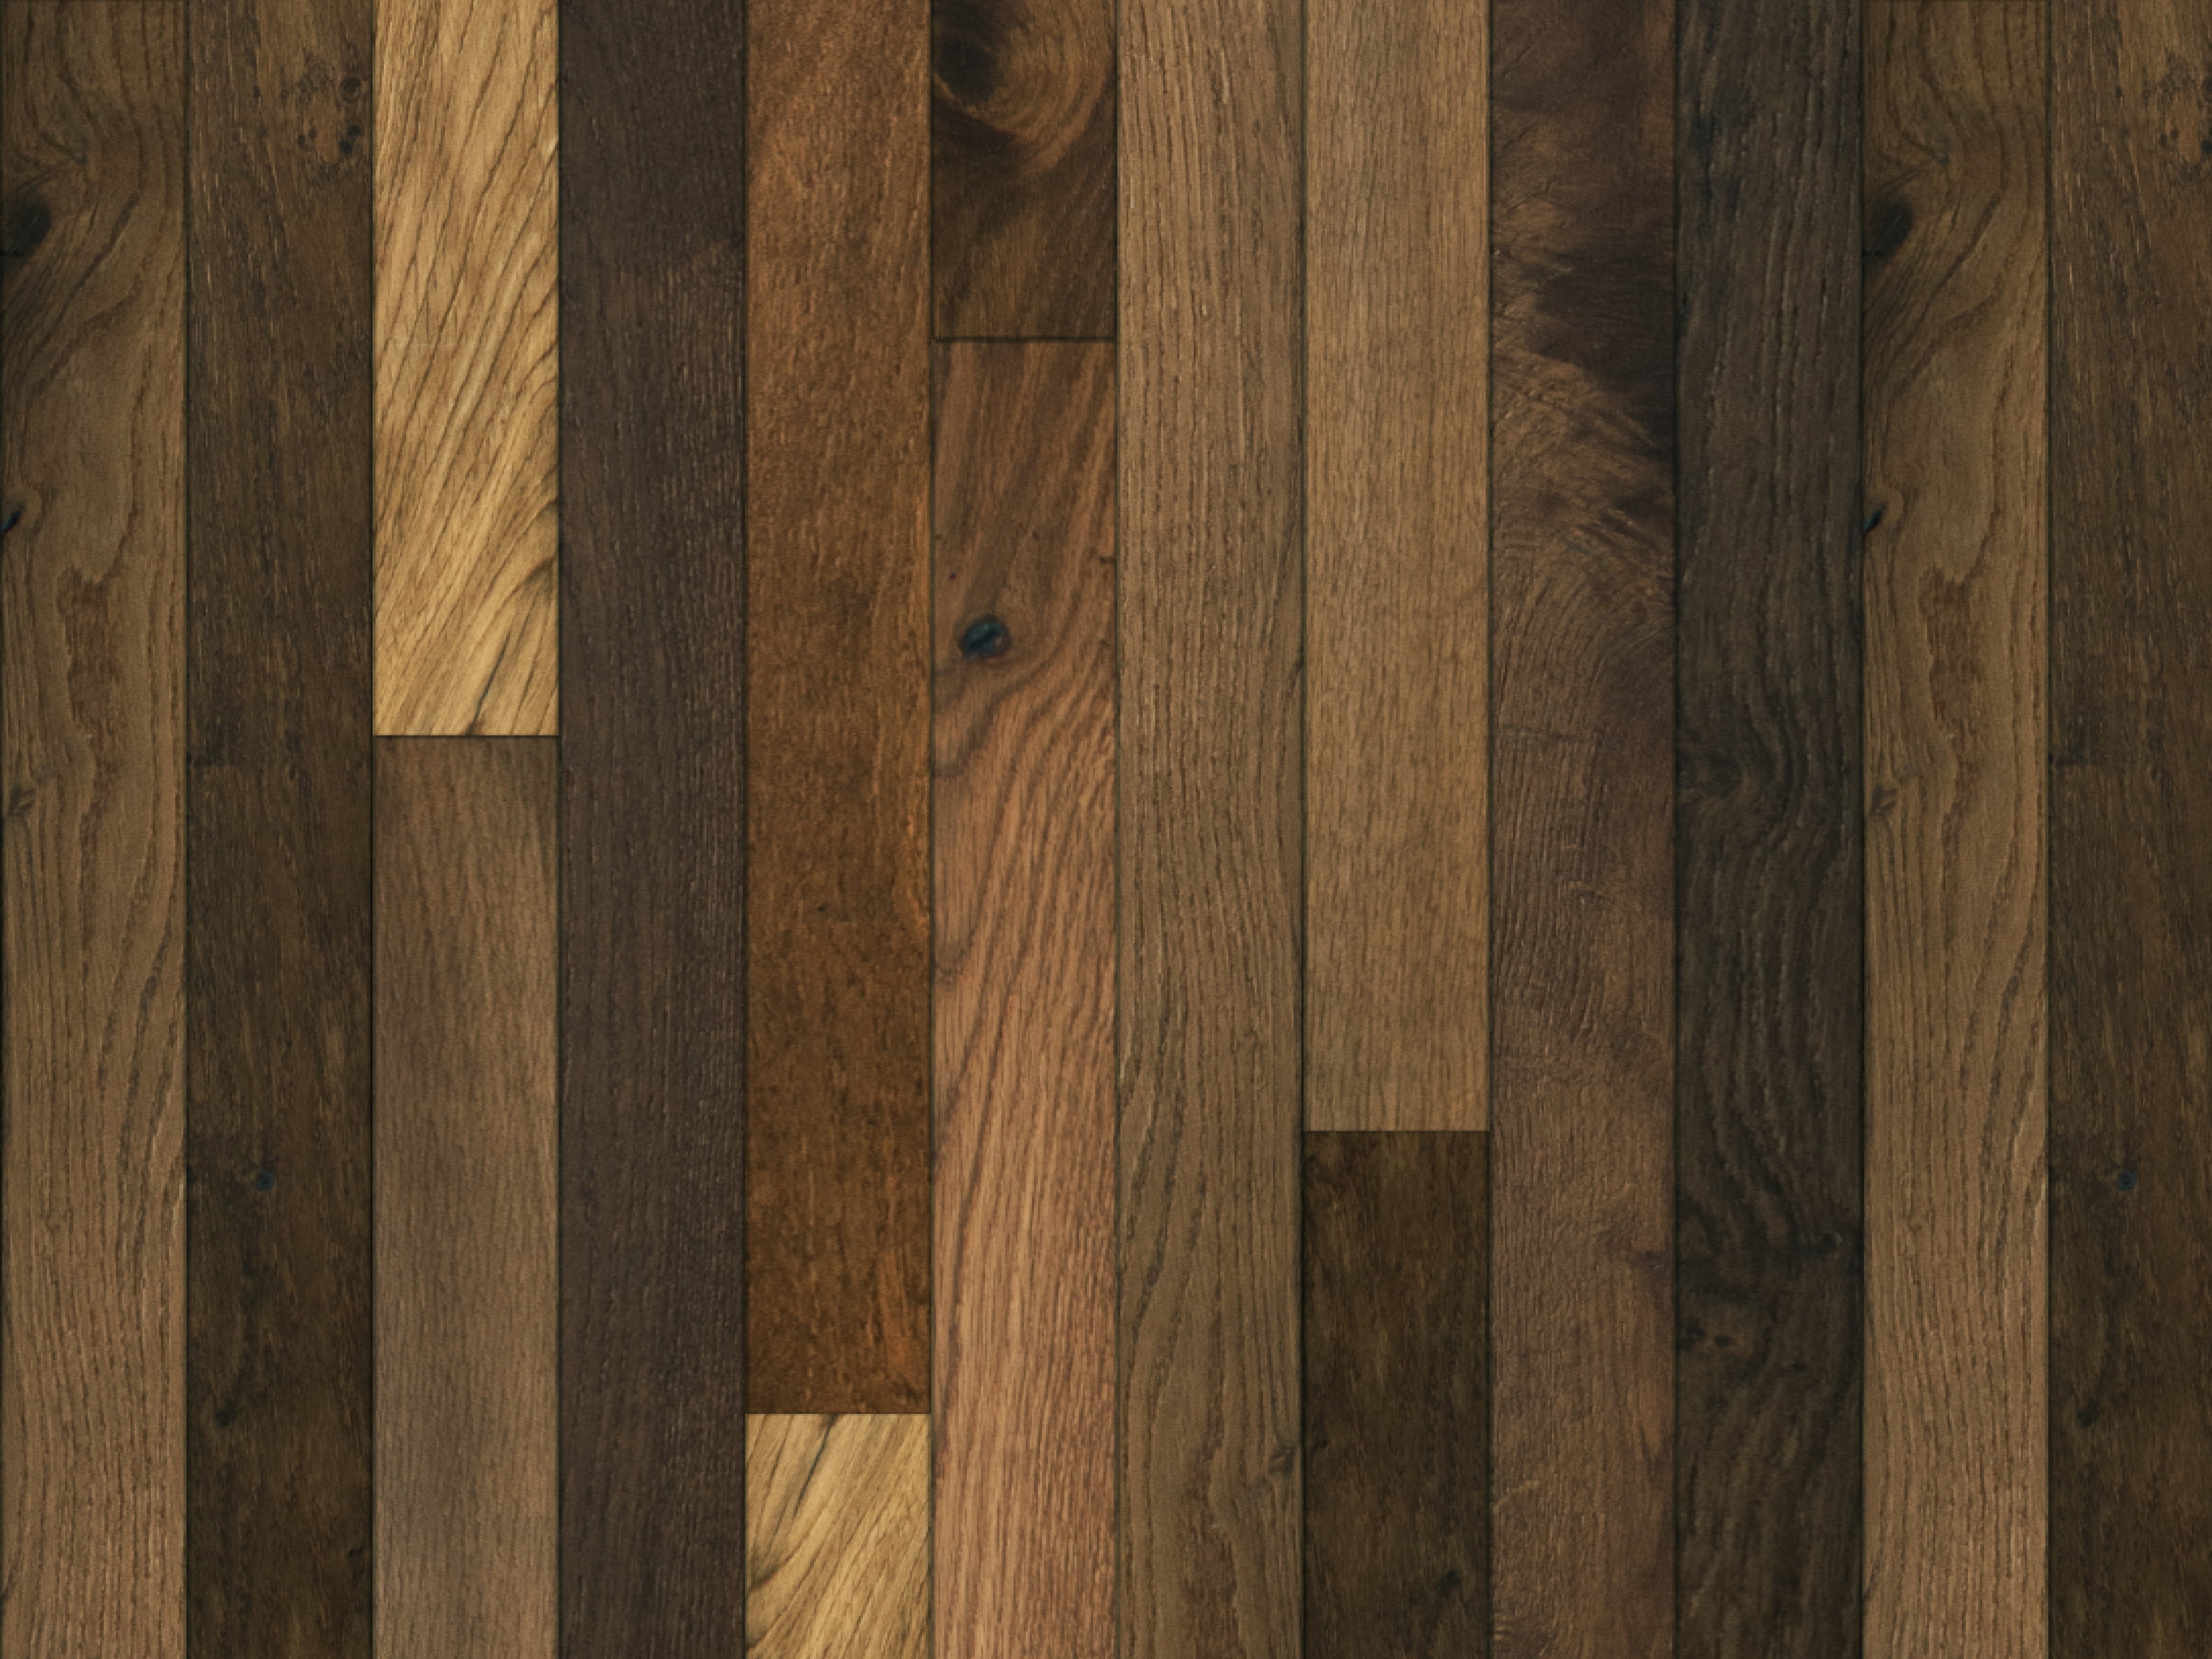 duchateau the guild makerlab edition joist european oak engineered hardnatural wood floor uv lacquer finish for interior use distributed by surface group international